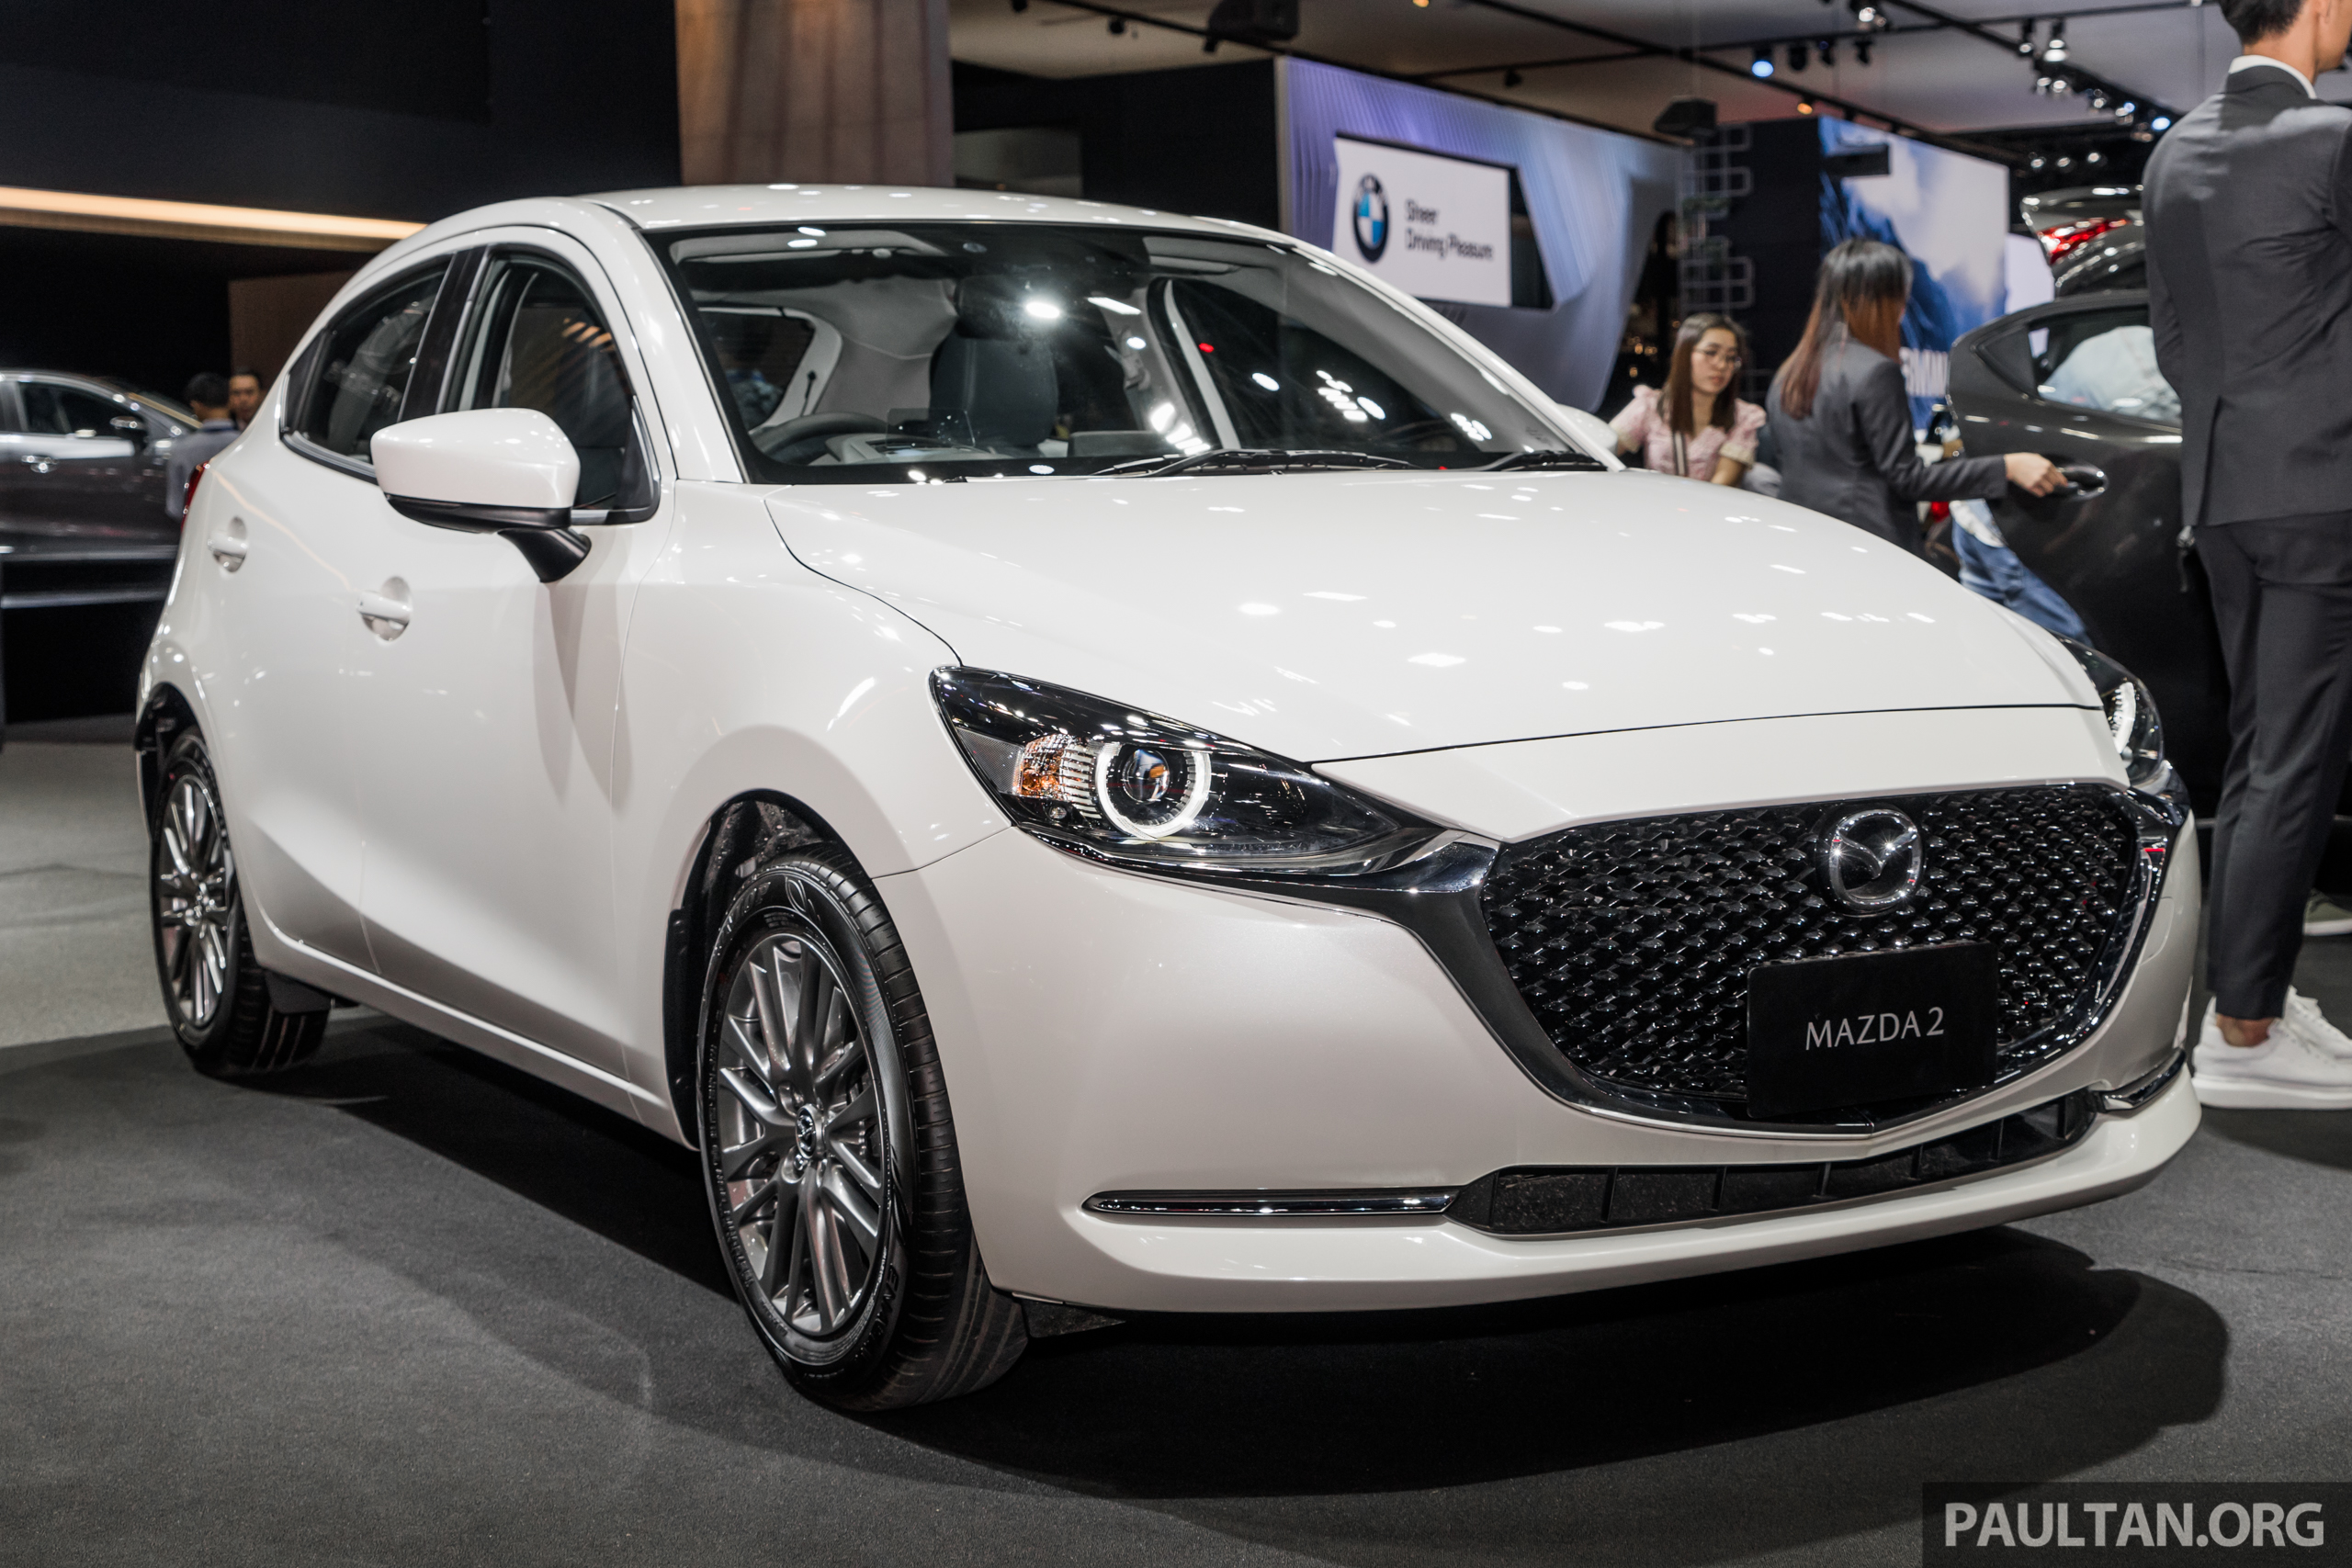 2020 Mazda 2 facelift launched at Thailand Motor Expo - 1.3L petrol and ...